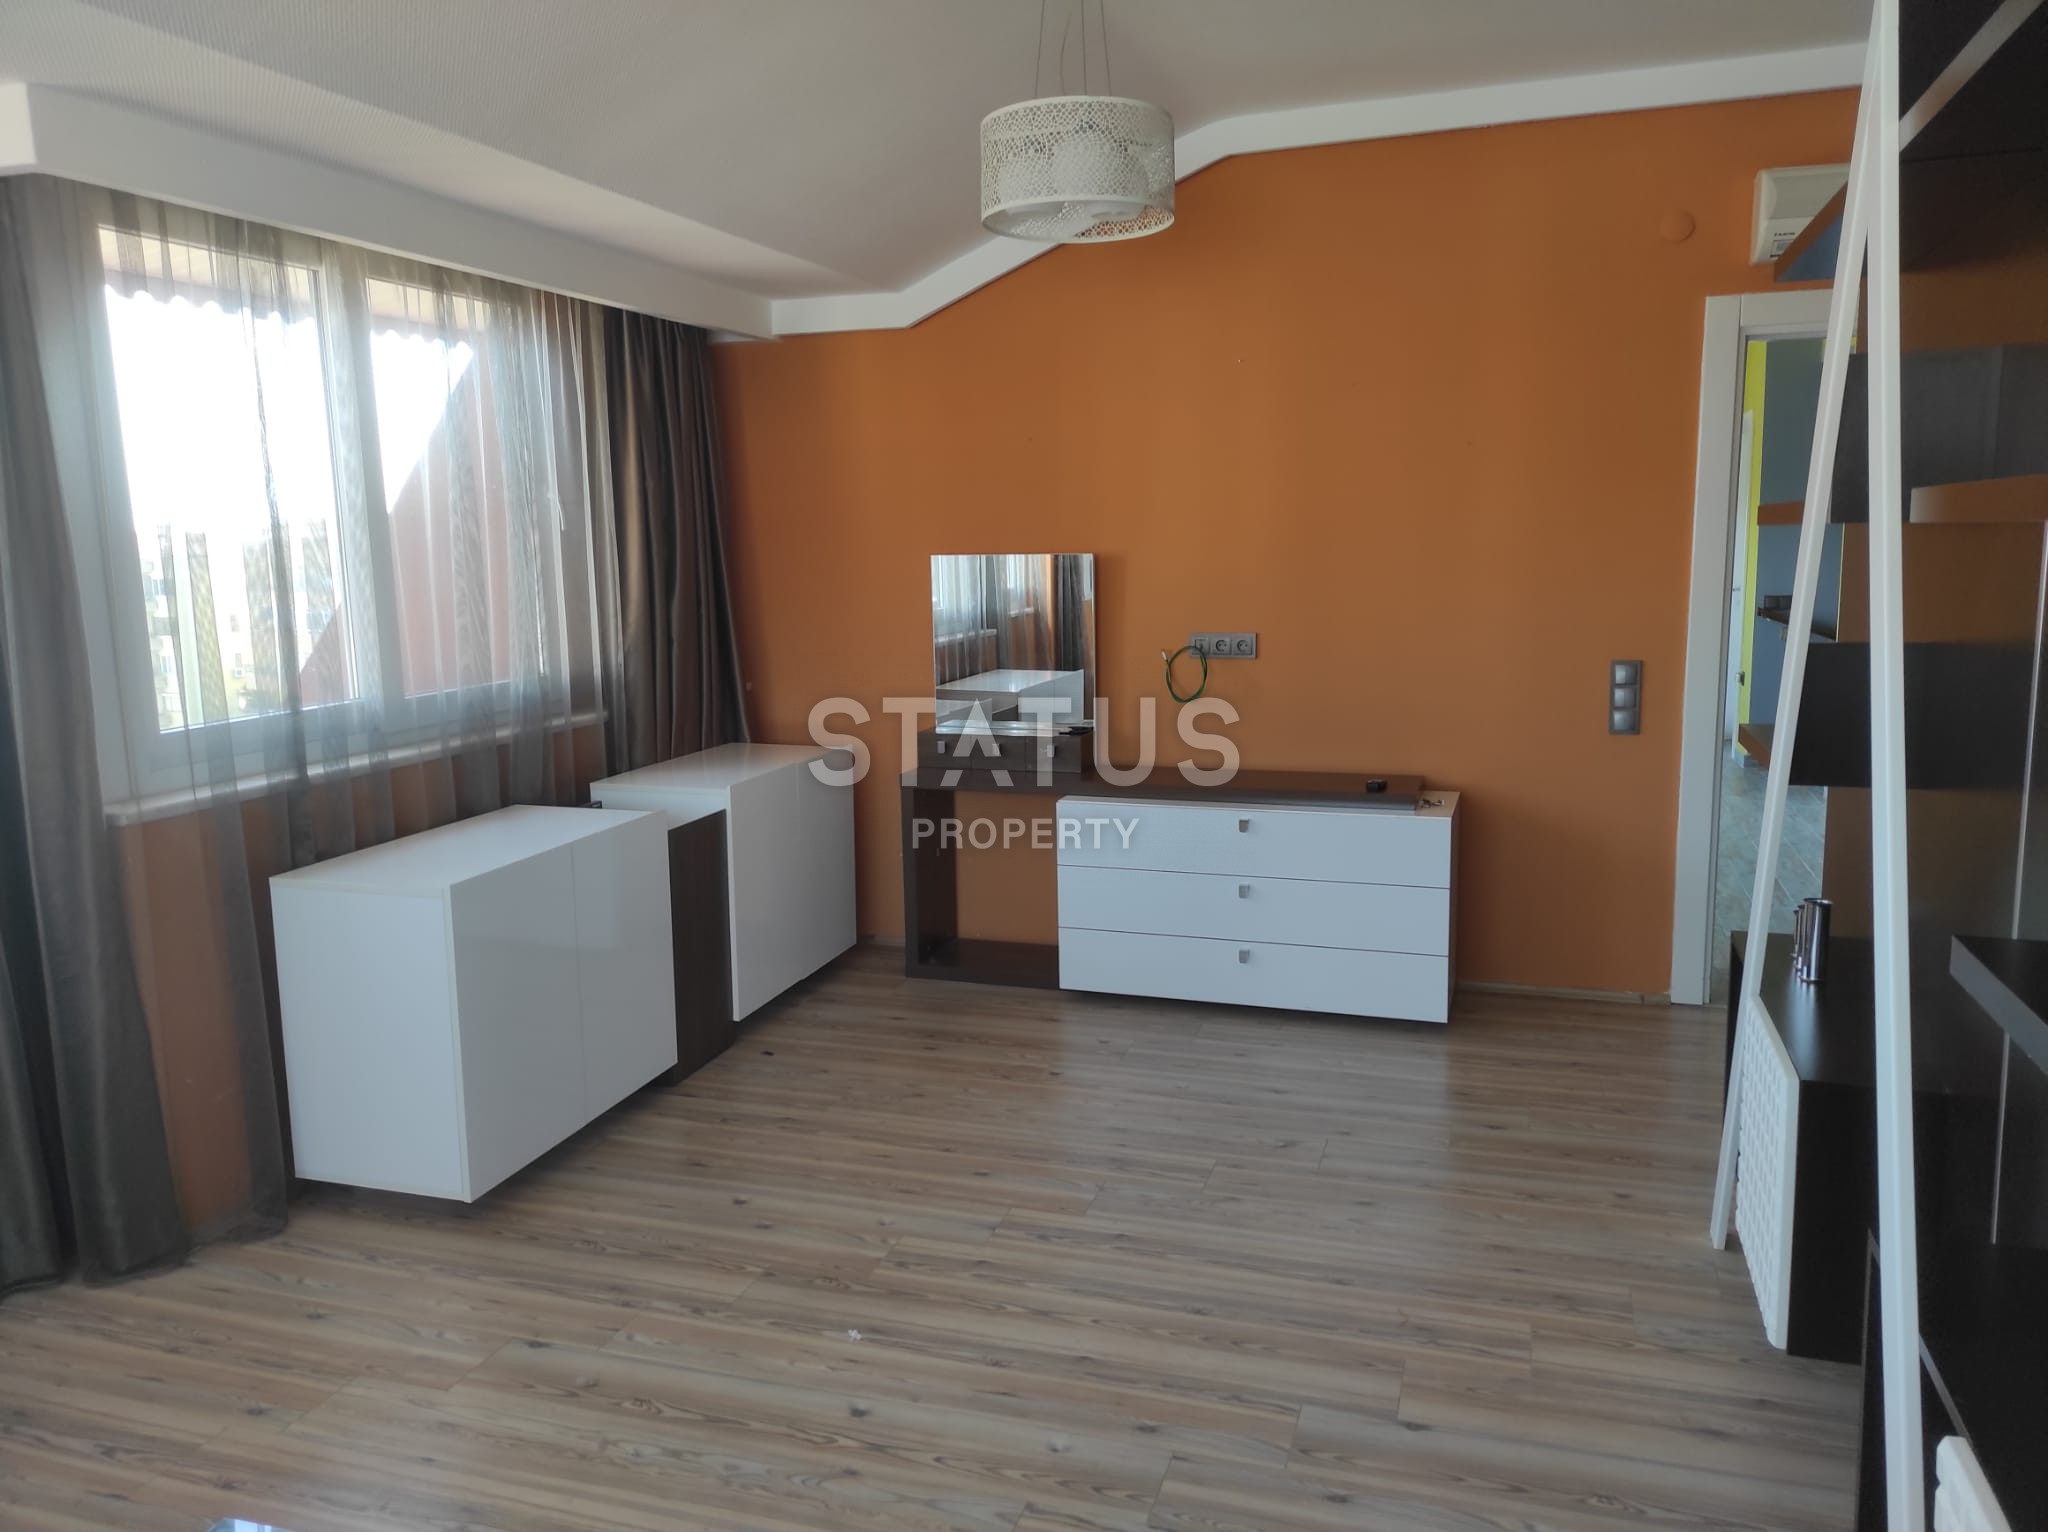 Spacious panoramic duplex in the center of Alanya overlooking the sea. 200m2 фото 2